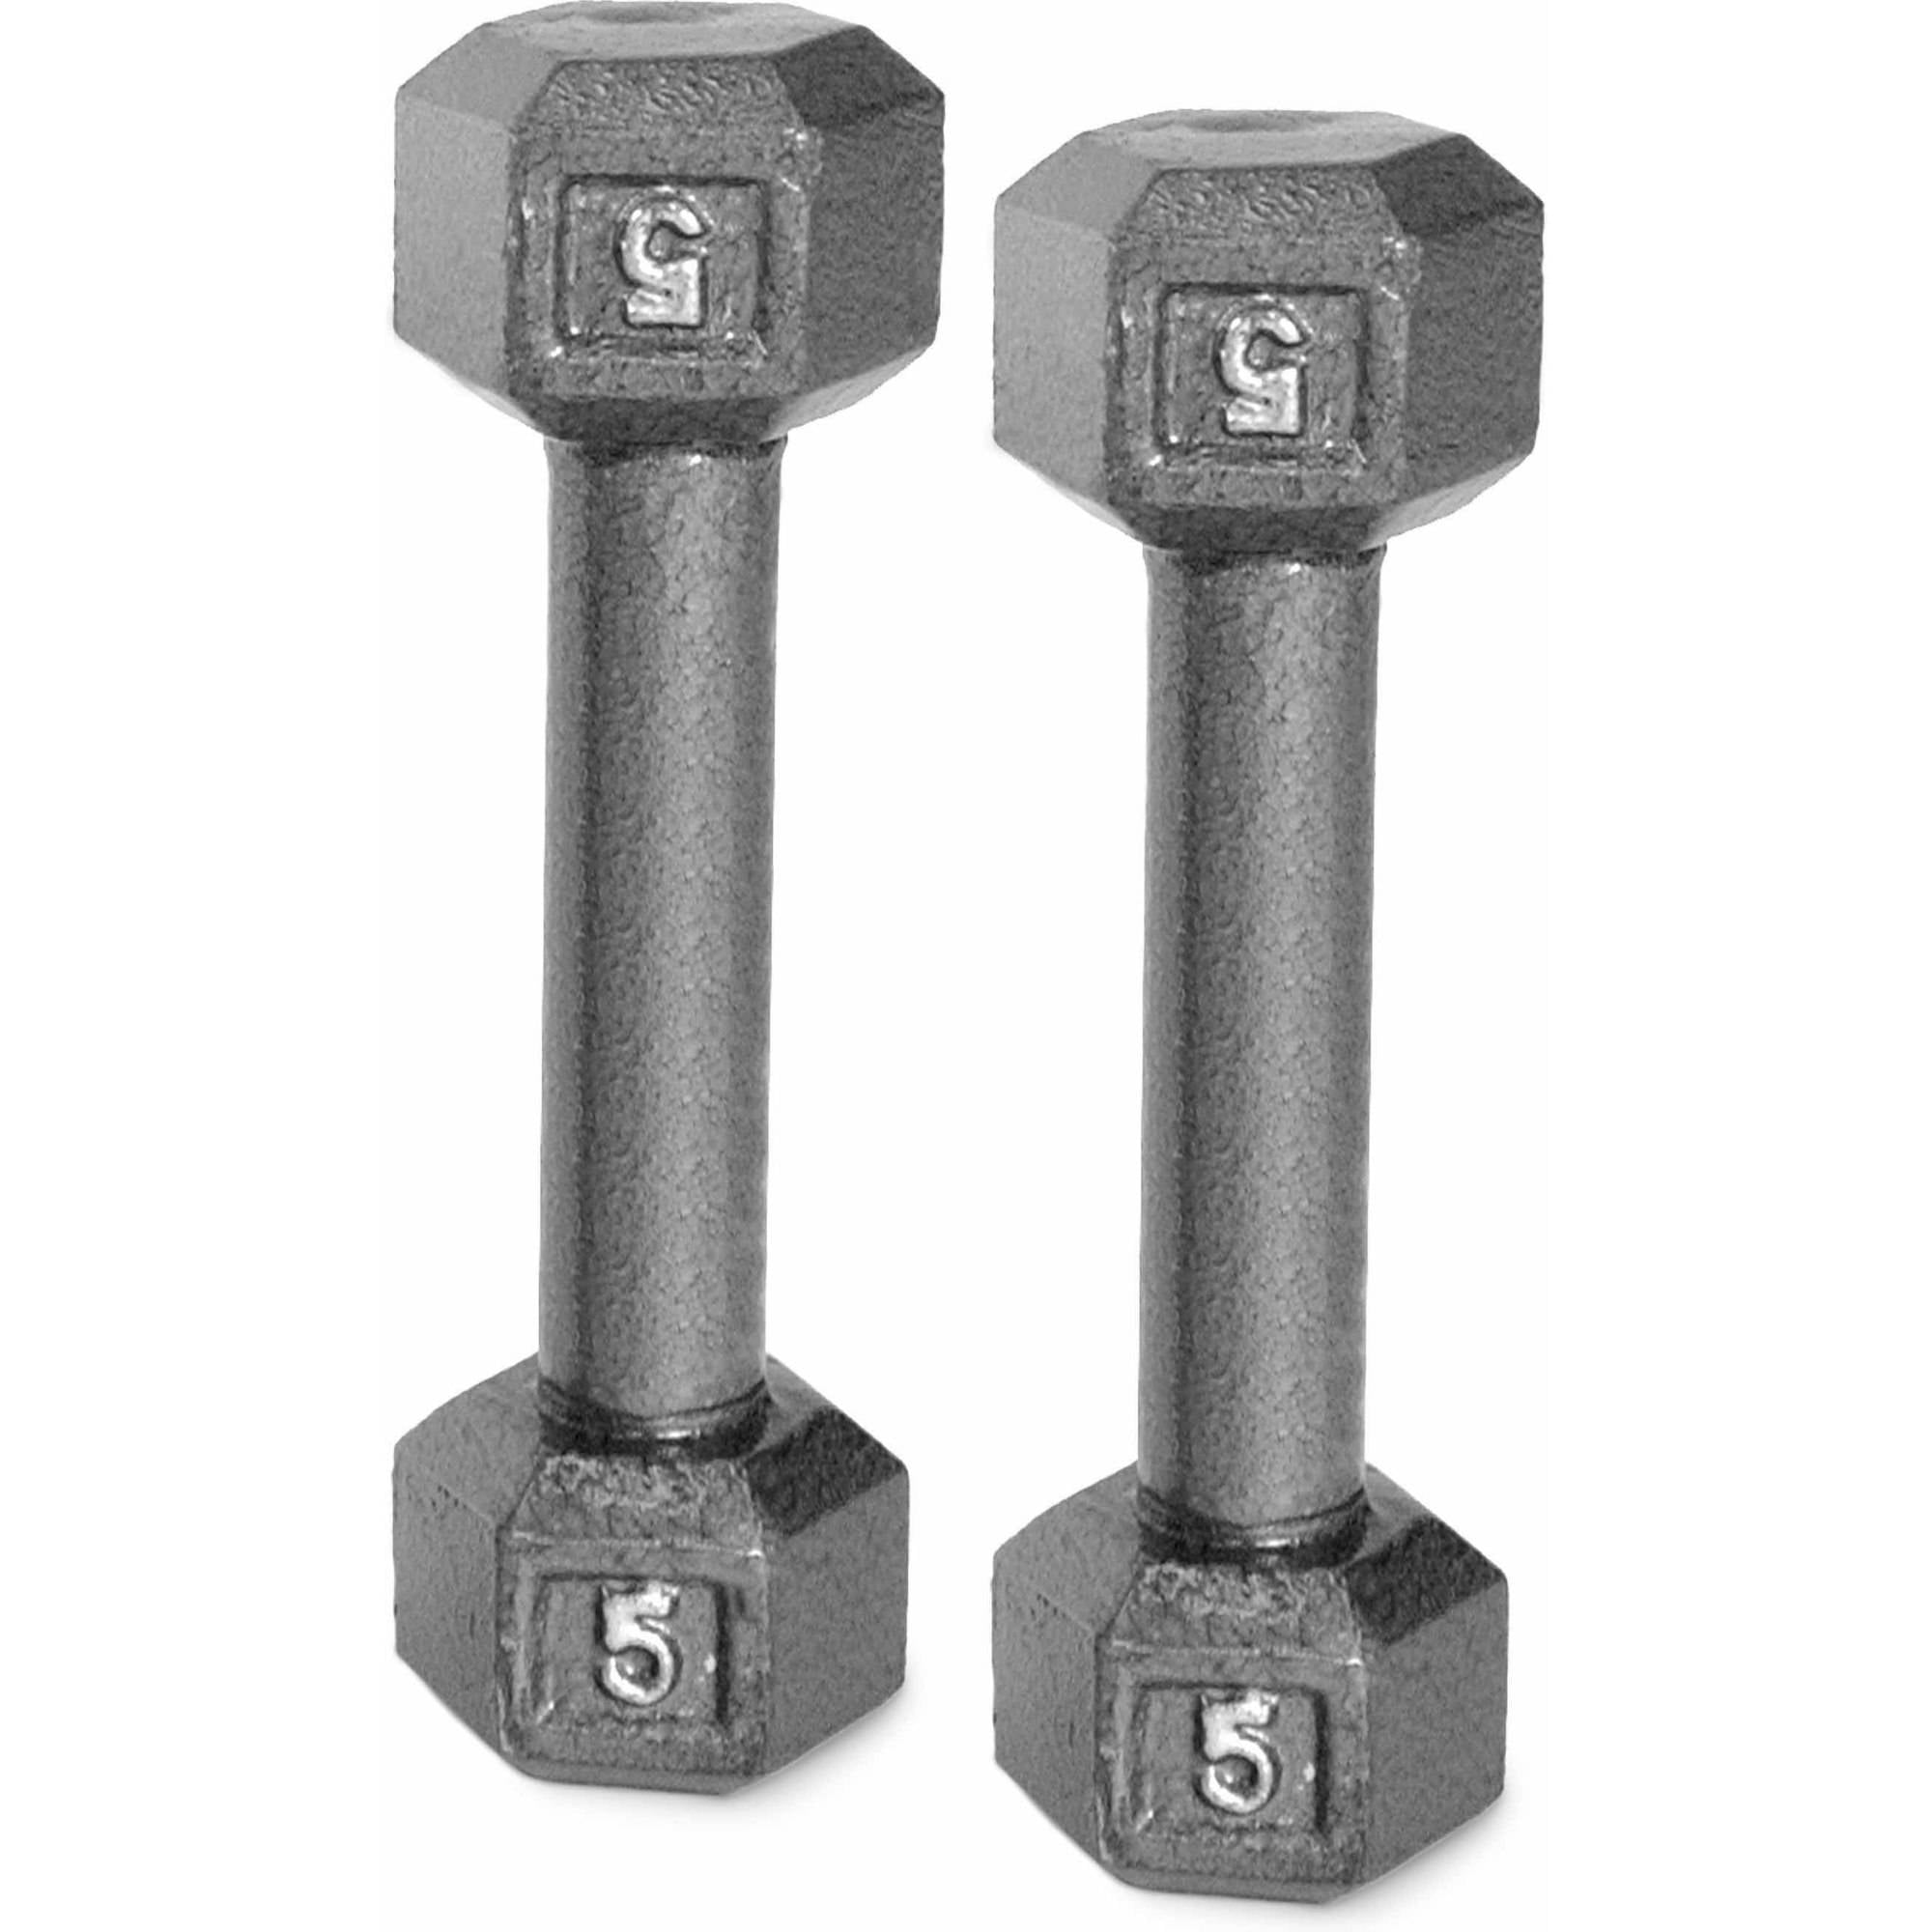 5lb Pair of 1” CAP Barbell Dumbbell Weight Plates Weights 10lbs Total 